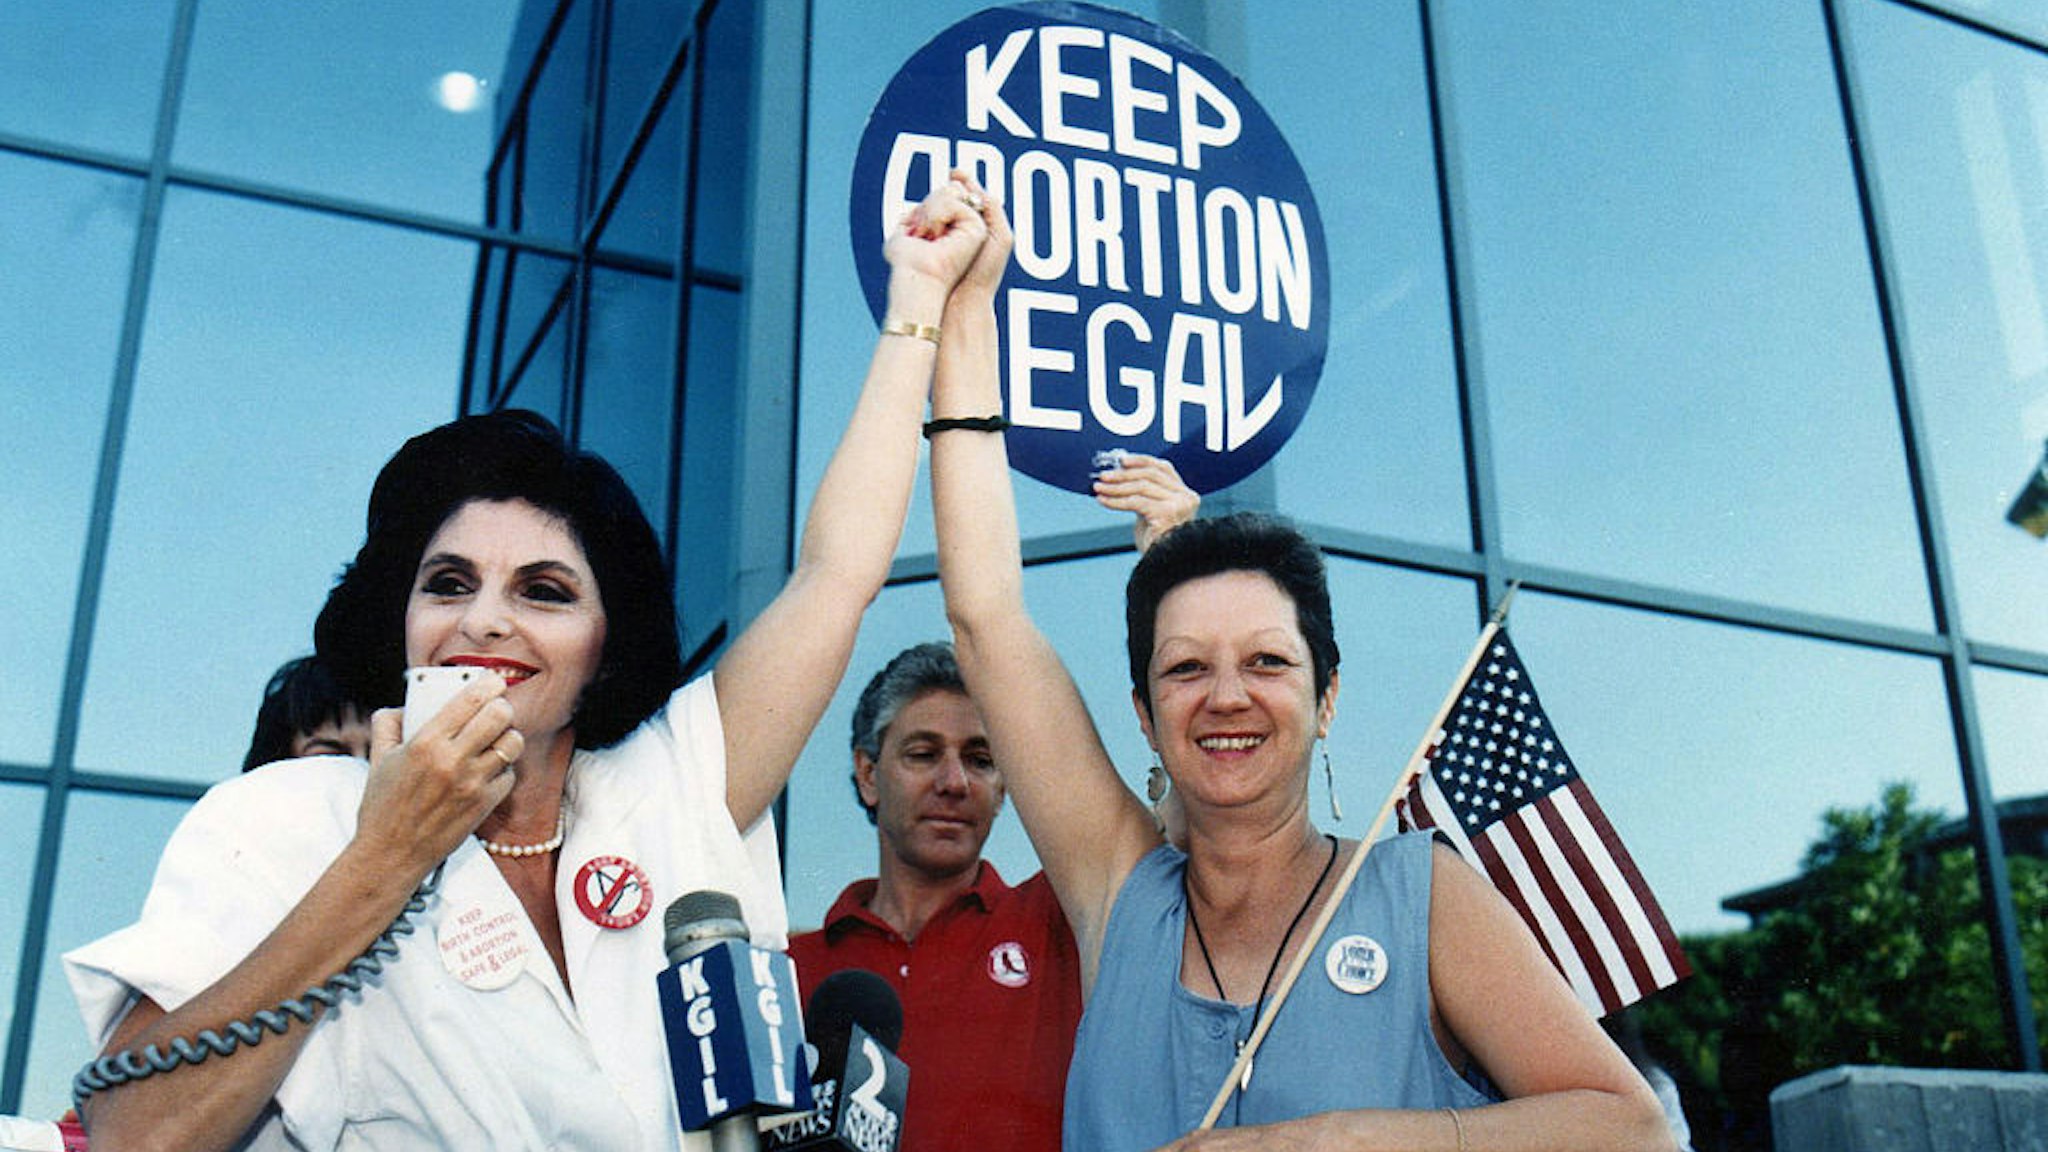 Attorney Gloria Allred and Norma McCorvey (R),'Jane Roe' plaintiff from Landmark court case Roe vs. Wade during Pro Choice Rally, July 4, 1989 in Burbank, California.